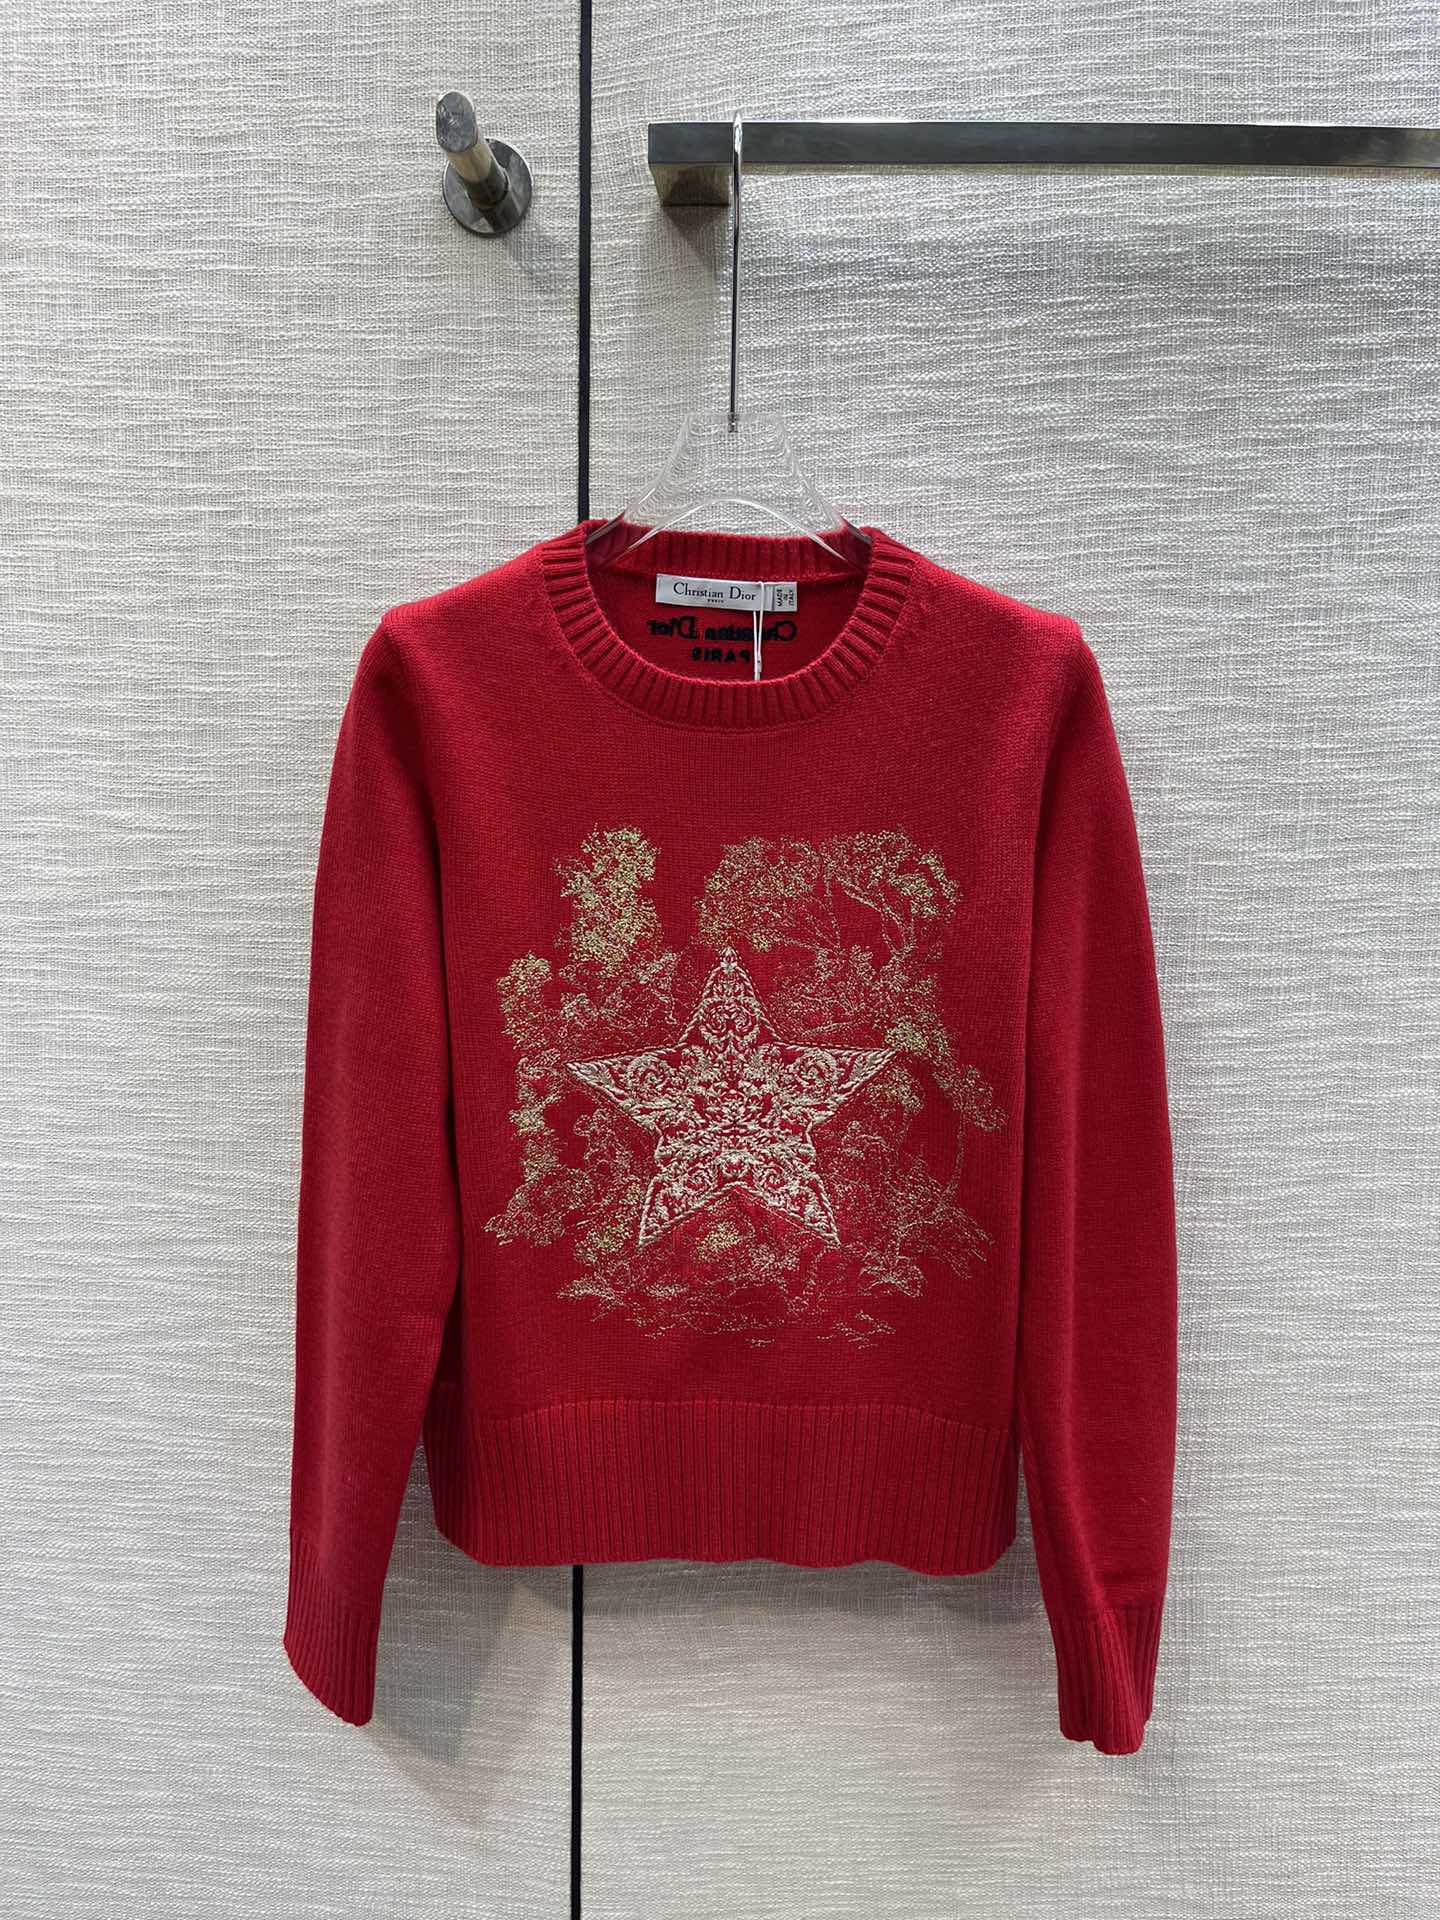 Replica
 Dior Clothing Sweatshirts Knitting Spring Collection Long Sleeve